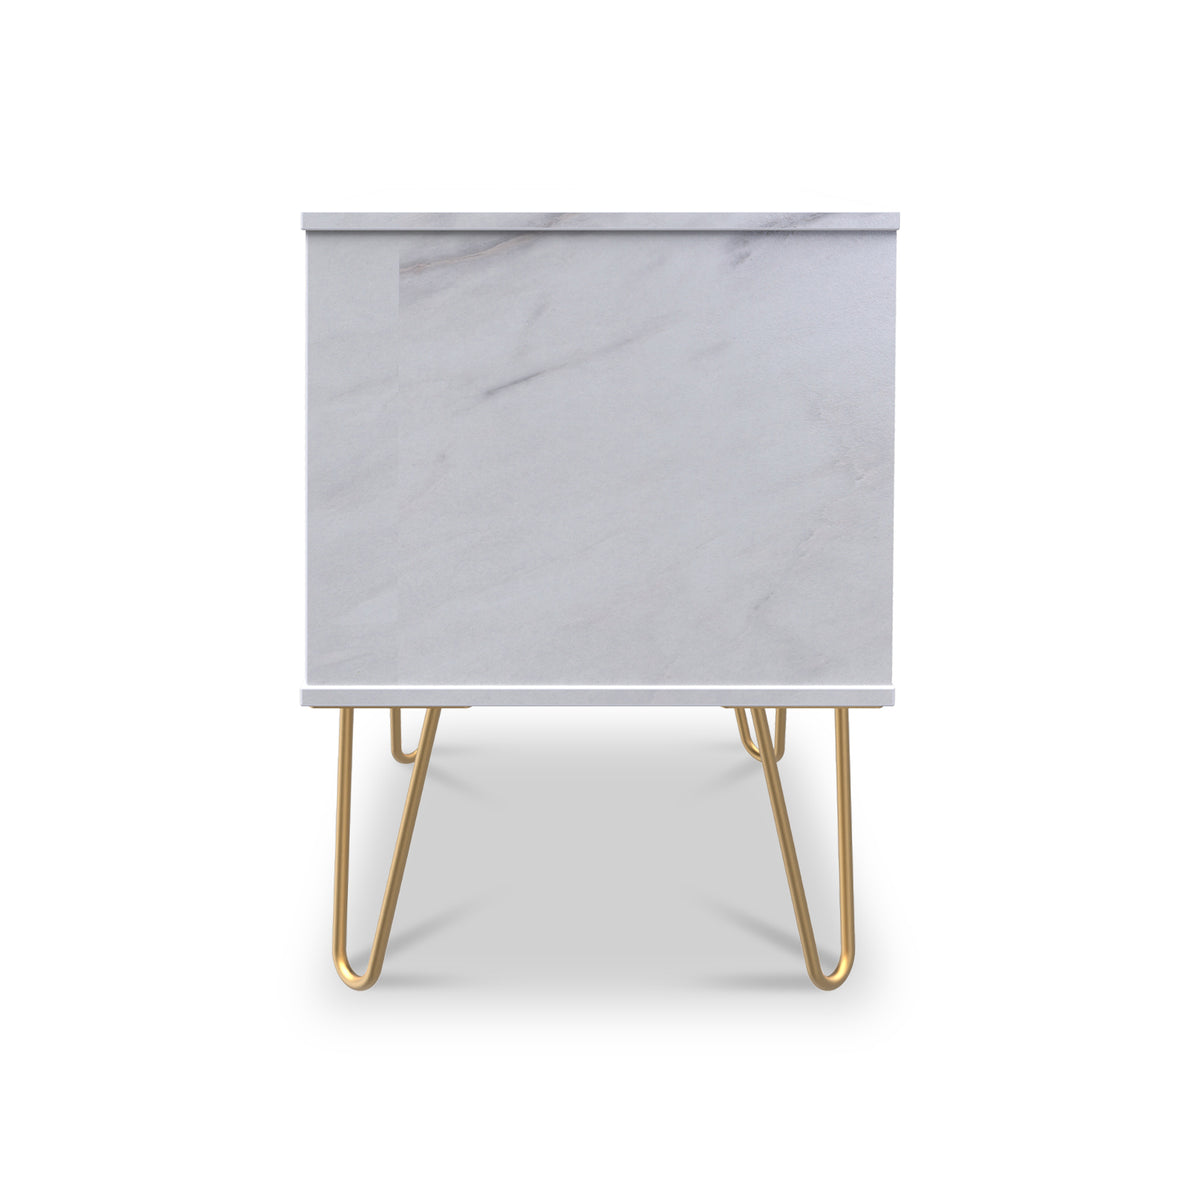 Moreno Marble Effect 2 Drawer Bedside Table from Roseland Furniture